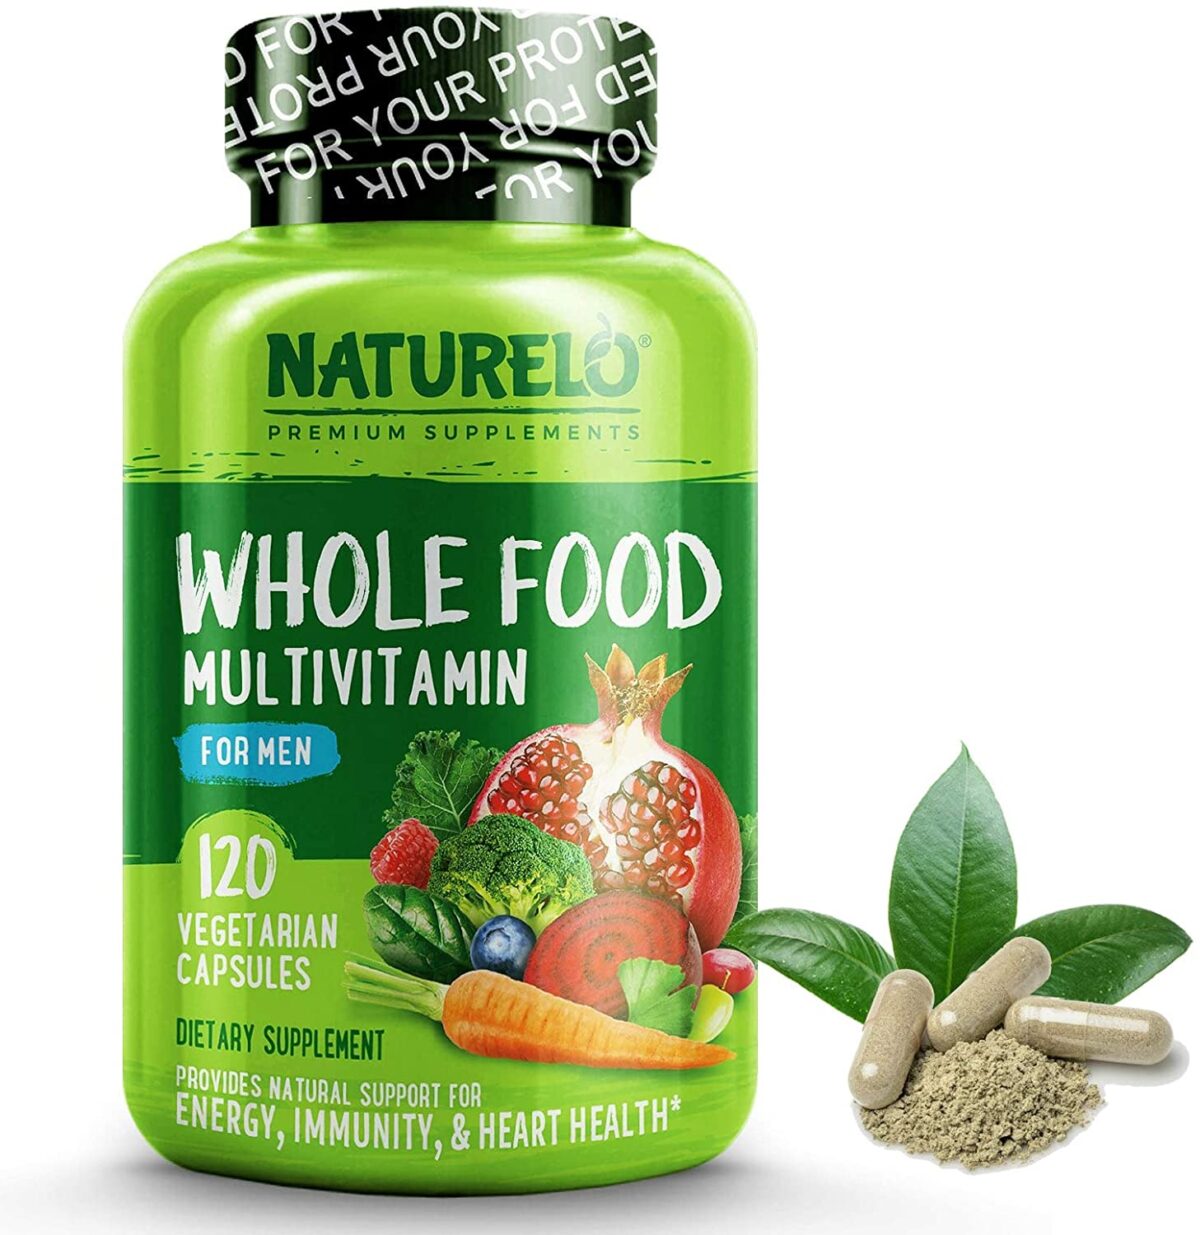 NATURELO Whole Food Multivitamin For Men – With Natural Vitamins, Minerals, Organic Extracts – Vegetarian – Best For Energy, Brain, Heart, Eye Health – 120 Vegan Capsules